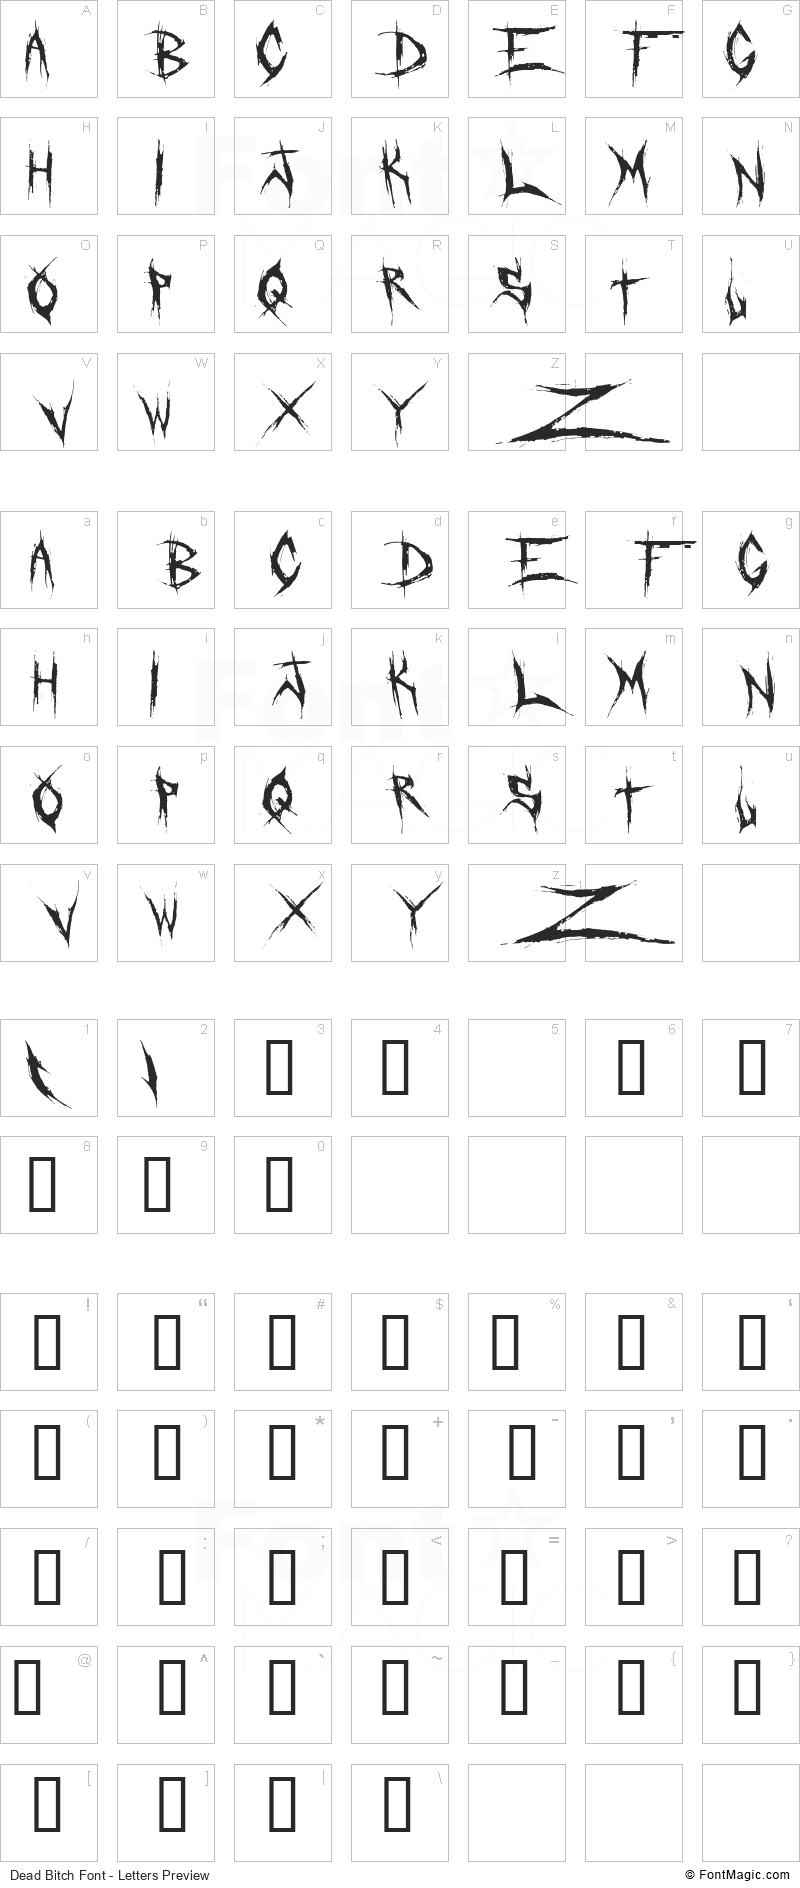 Dead Bitch Font - All Latters Preview Chart